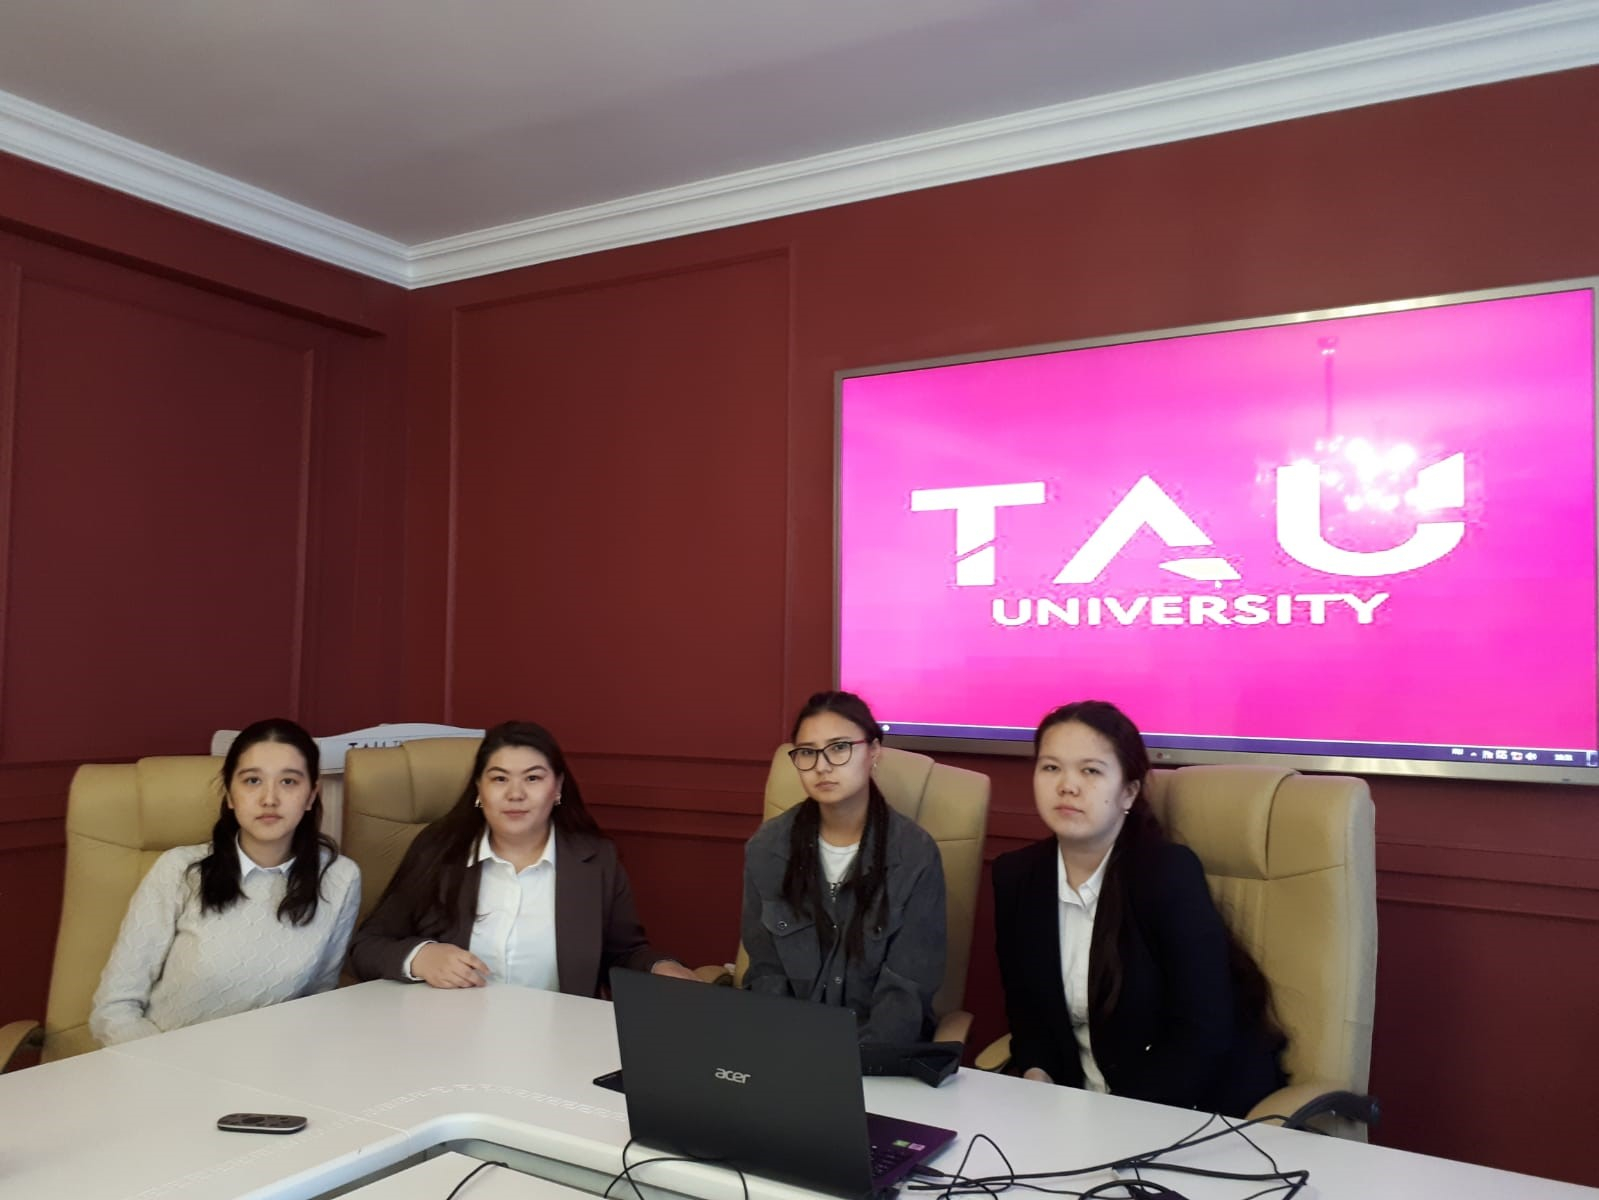 The “SAPAR” team of the University of Turan-Astana won 1st place in the IV International Student Olympiad on the techniques and tactics of active tourism.